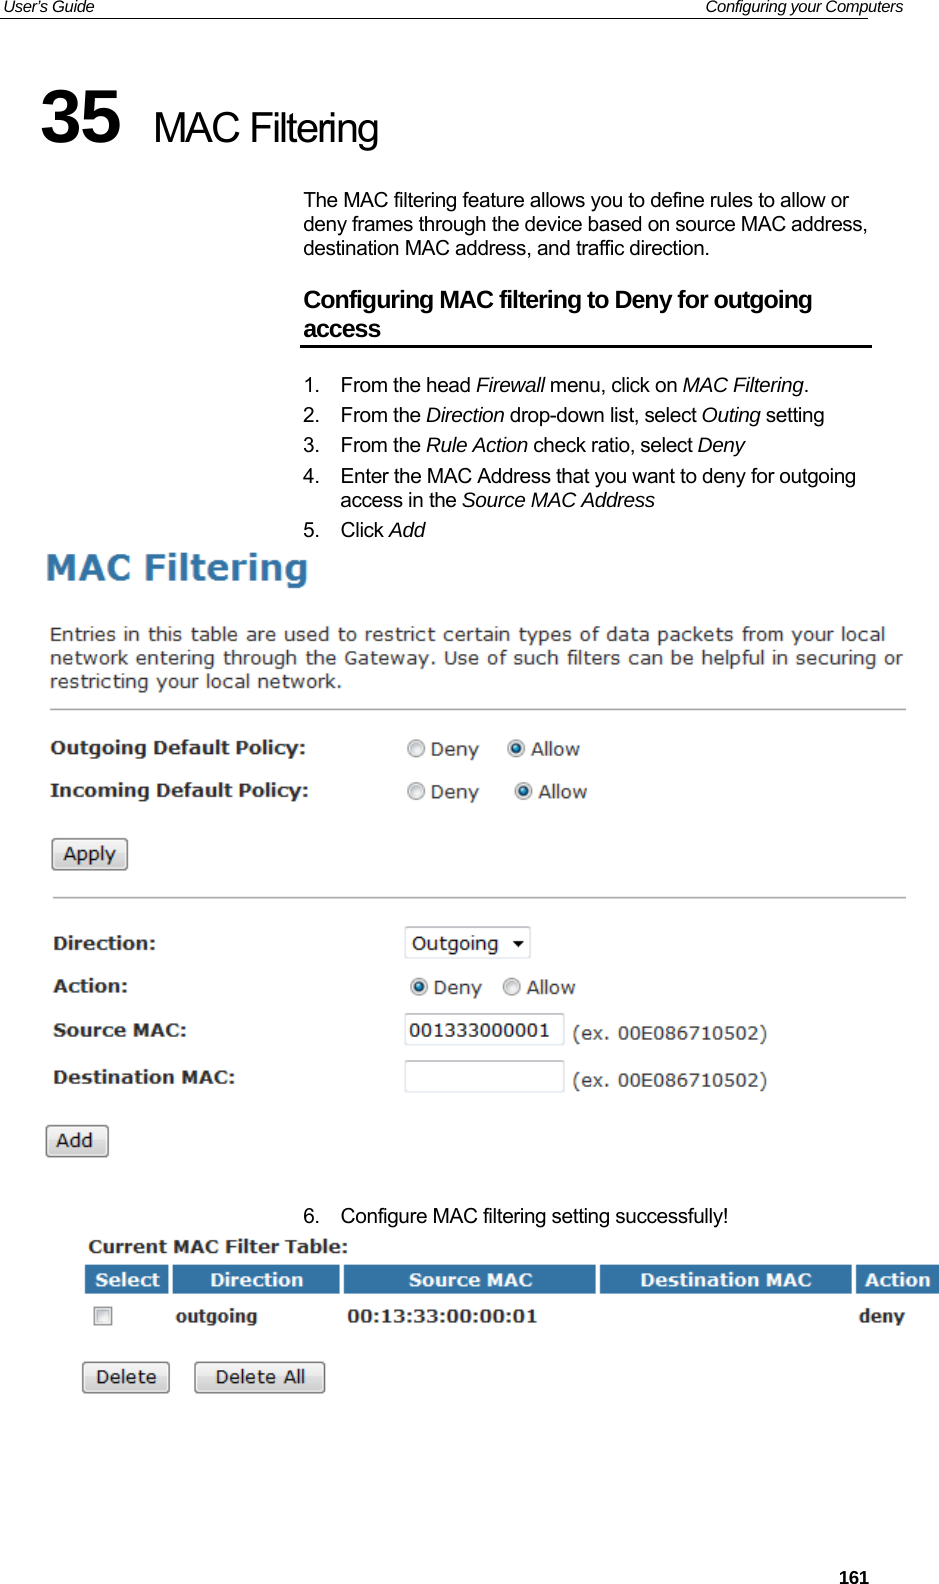 User’s Guide   Configuring your Computers 35  MAC Filtering The MAC filtering feature allows you to define rules to allow or deny frames through the device based on source MAC address, destination MAC address, and traffic direction. Configuring MAC filtering to Deny for outgoing access 1. From the head Firewall menu, click on MAC Filtering. 2. From the Direction drop-down list, select Outing setting 3. From the Rule Action check ratio, select Deny 4.  Enter the MAC Address that you want to deny for outgoing access in the Source MAC Address 5. Click Add    6.  Configure MAC filtering setting successfully!      161